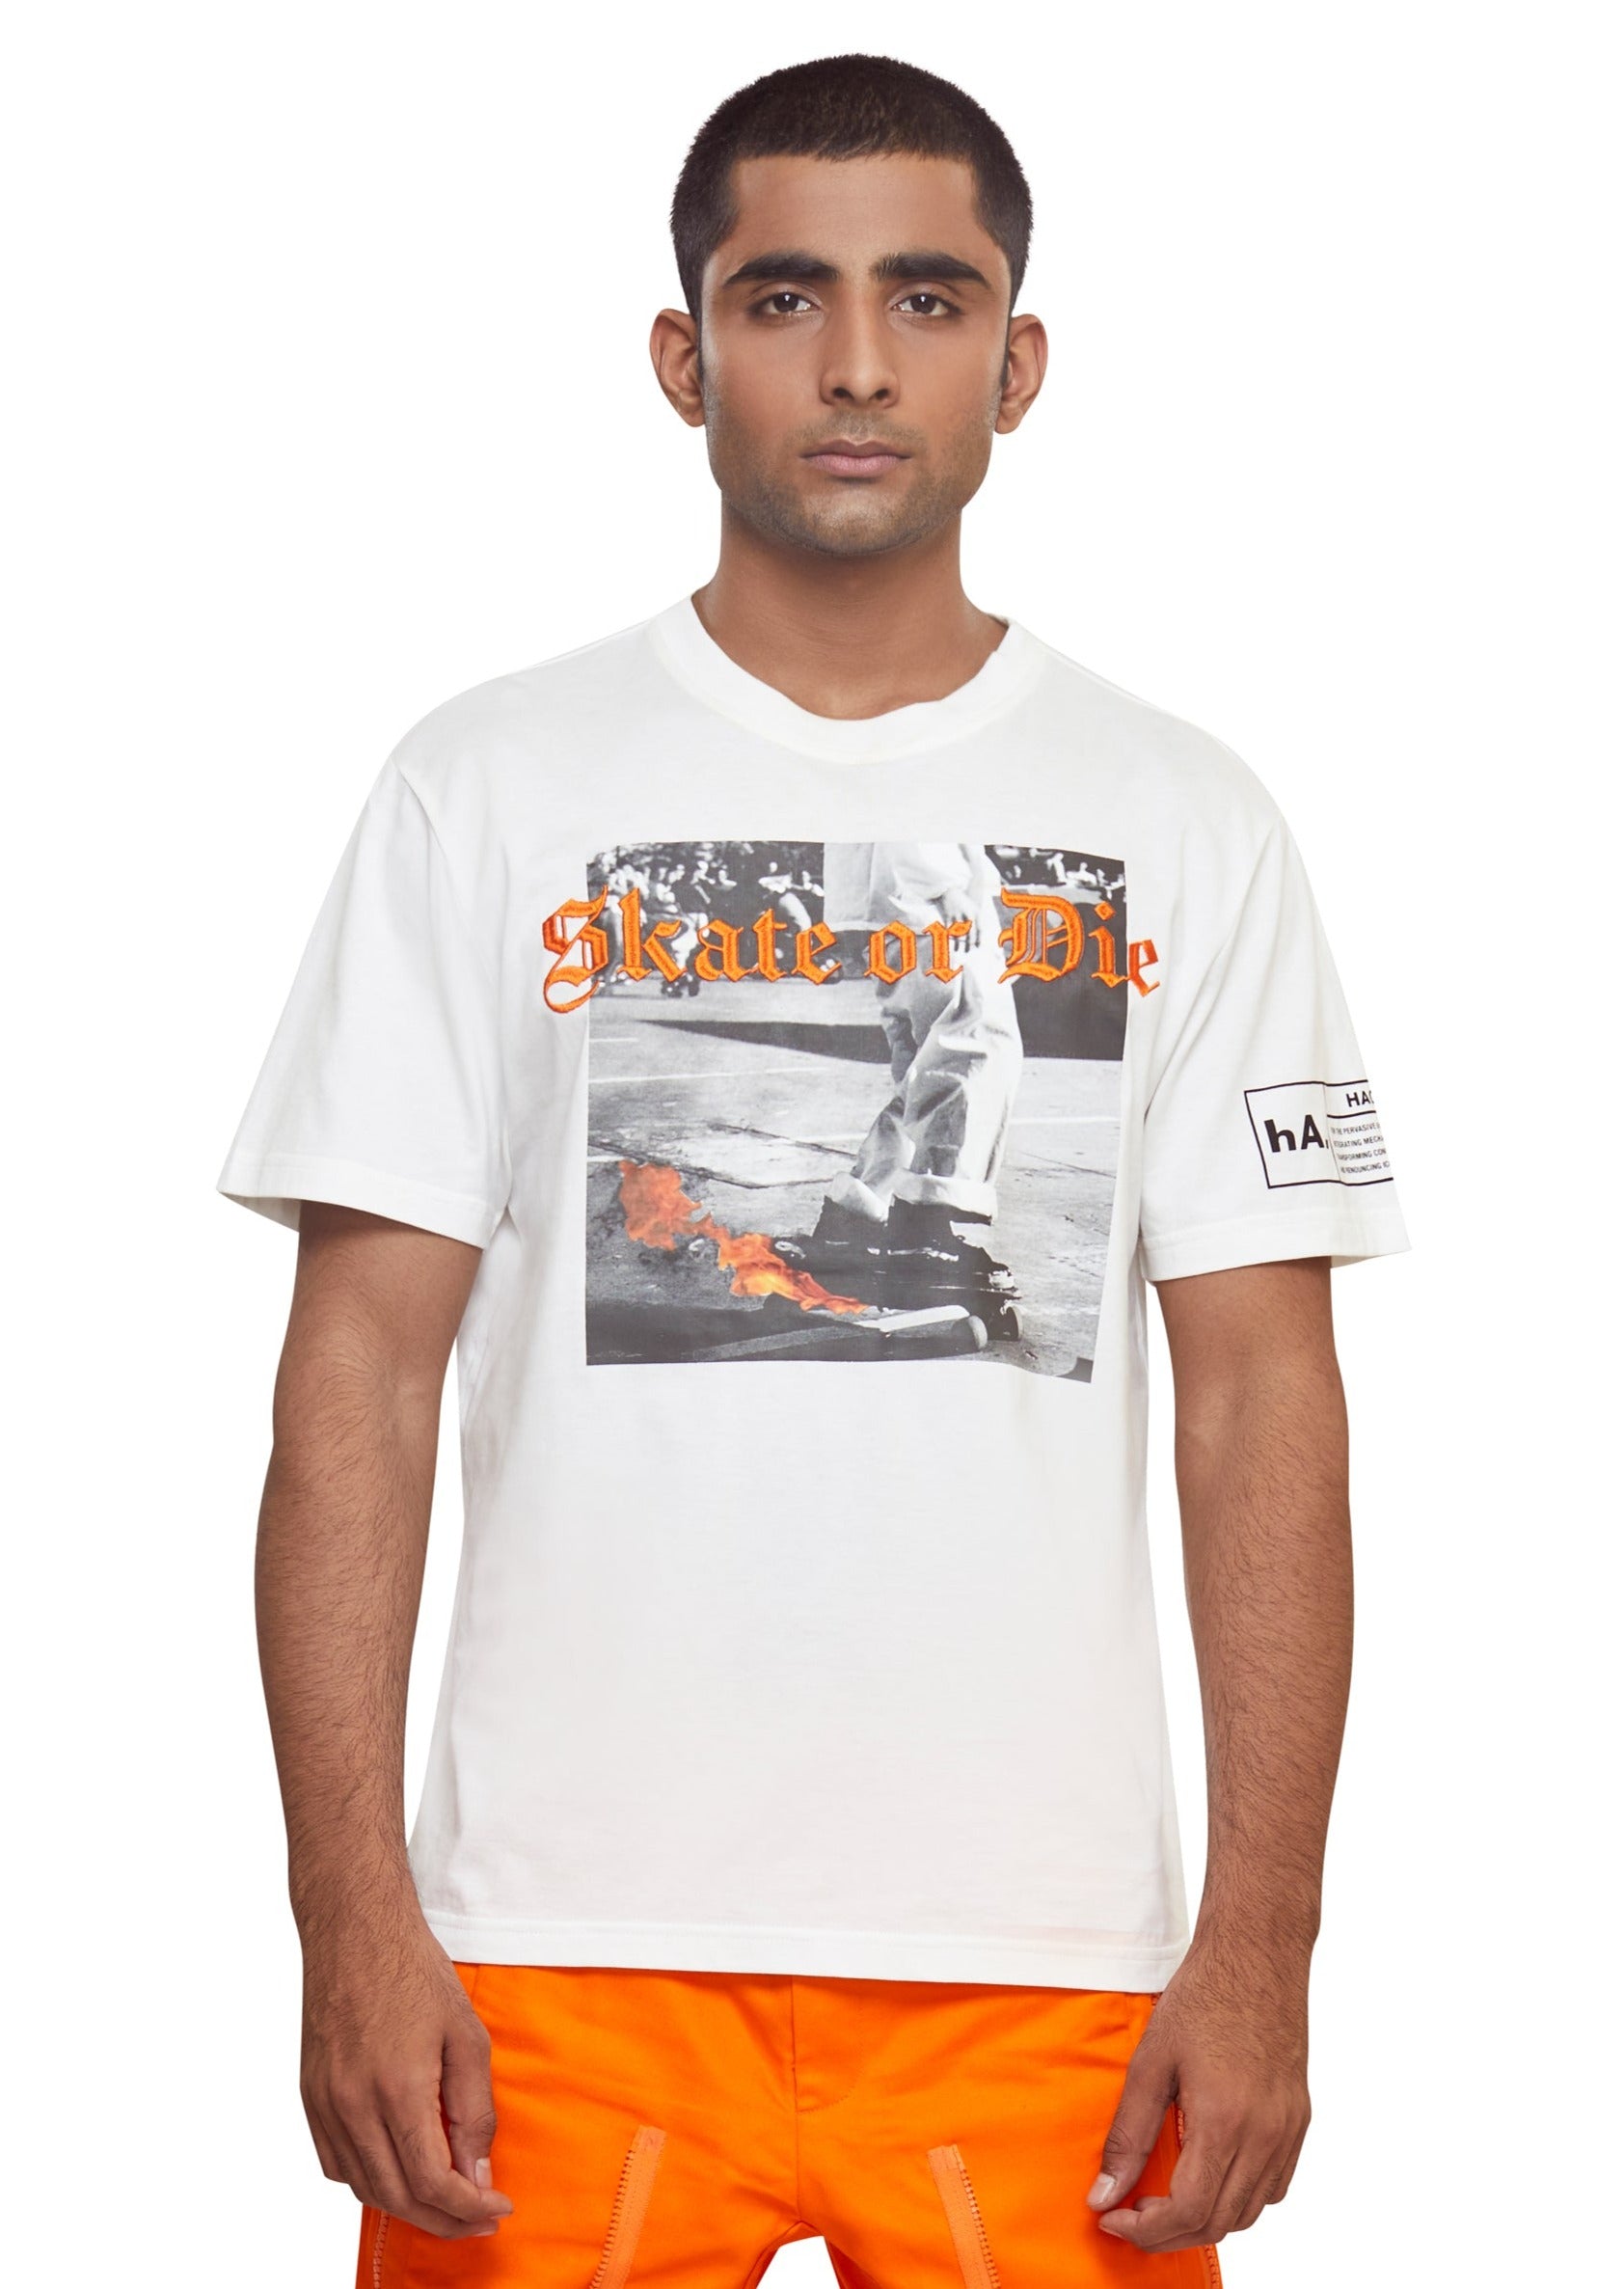 Off-white Cotton "Skate or Die" graphic printed and embroidered T-Shirt from the brand Haculla